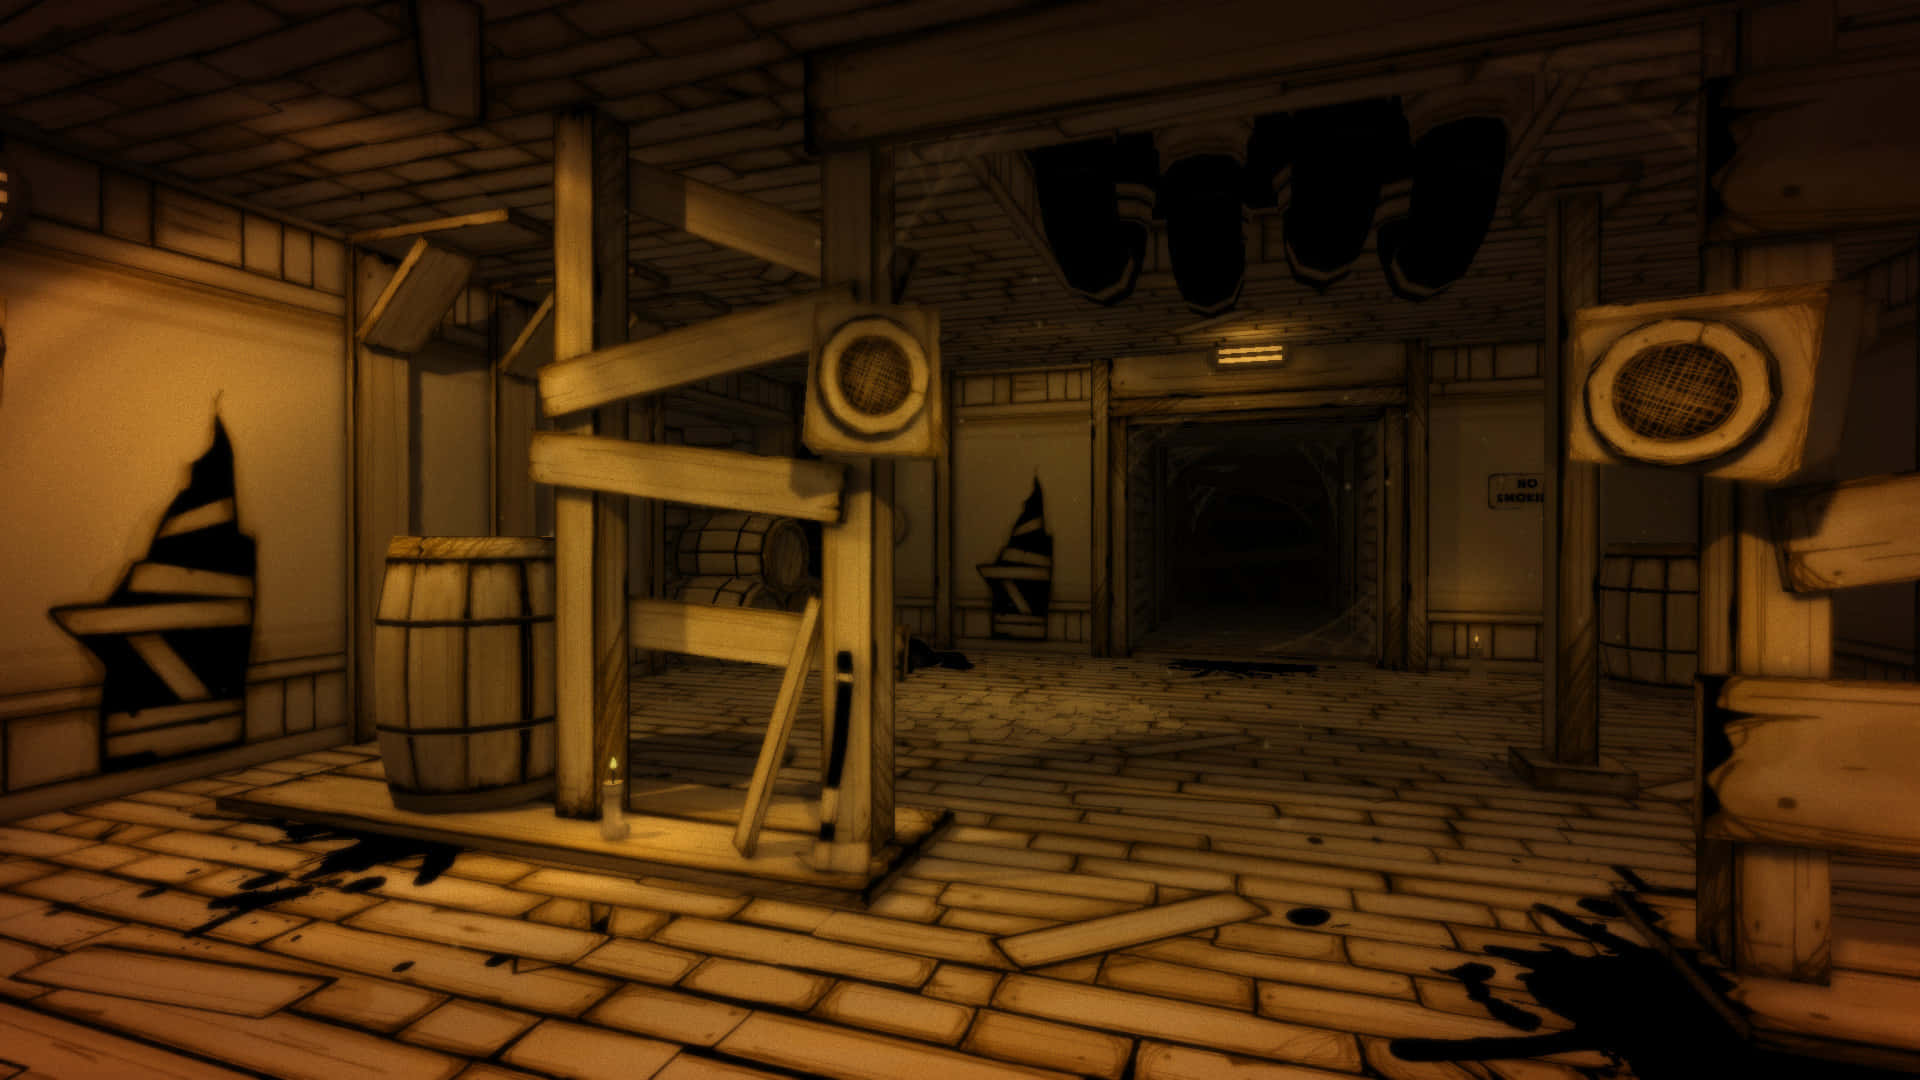 Step into the world of horror with Bendy and the Ink Machine